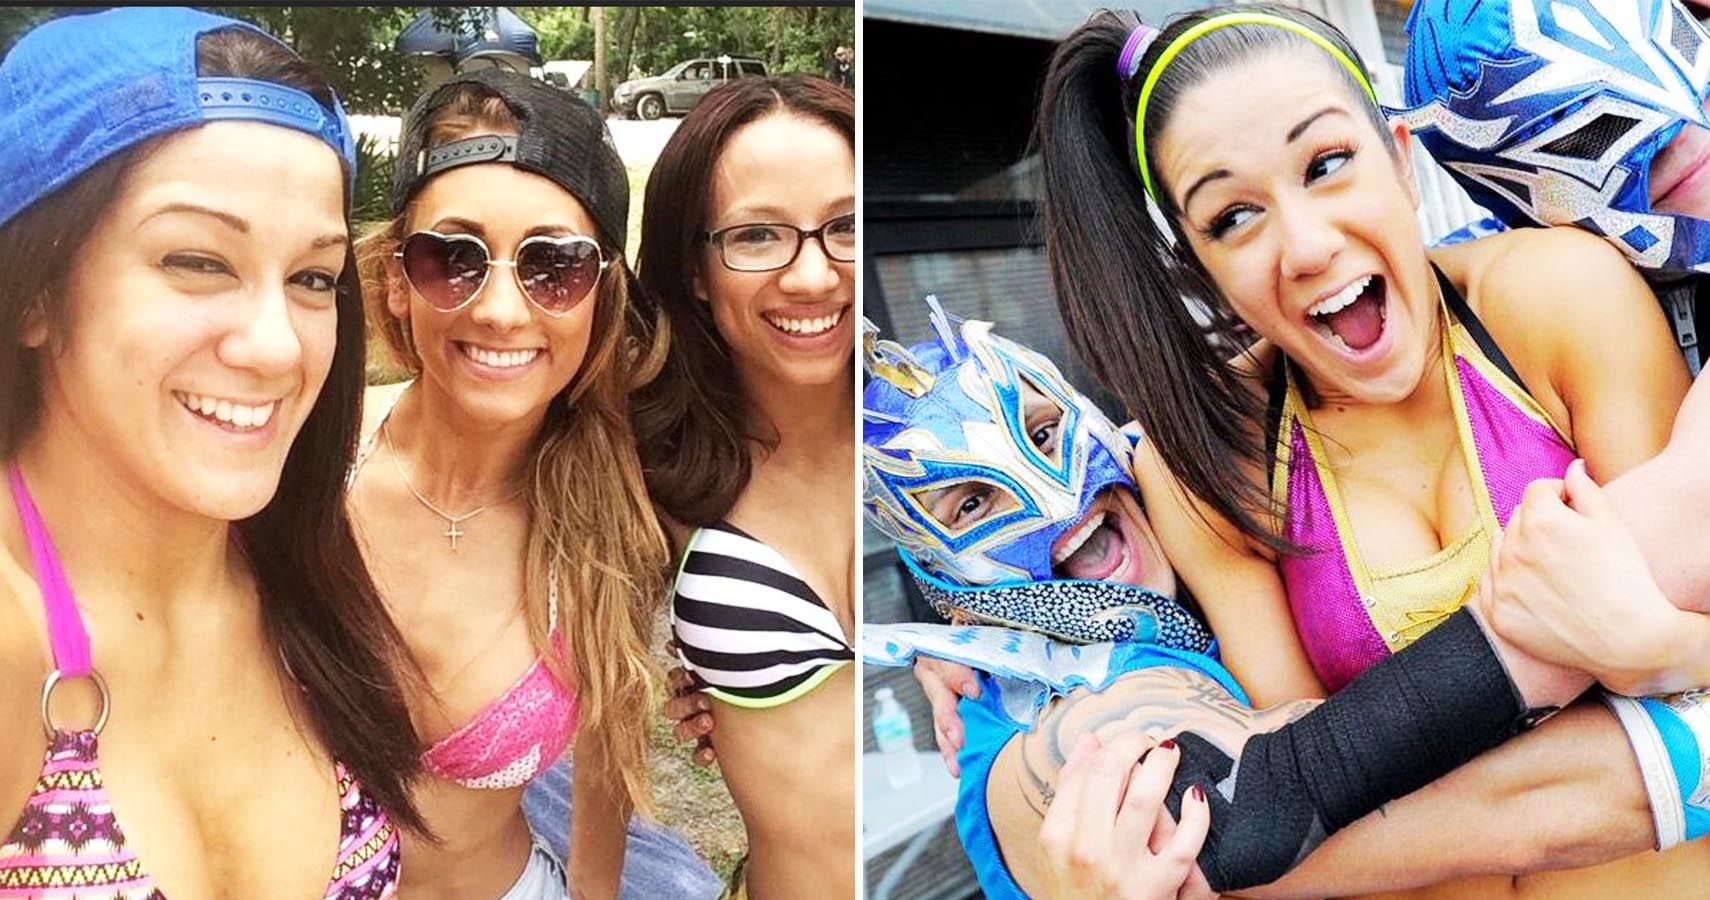 15 Surprisingly Hot Photos Of Bayley | TheSportster